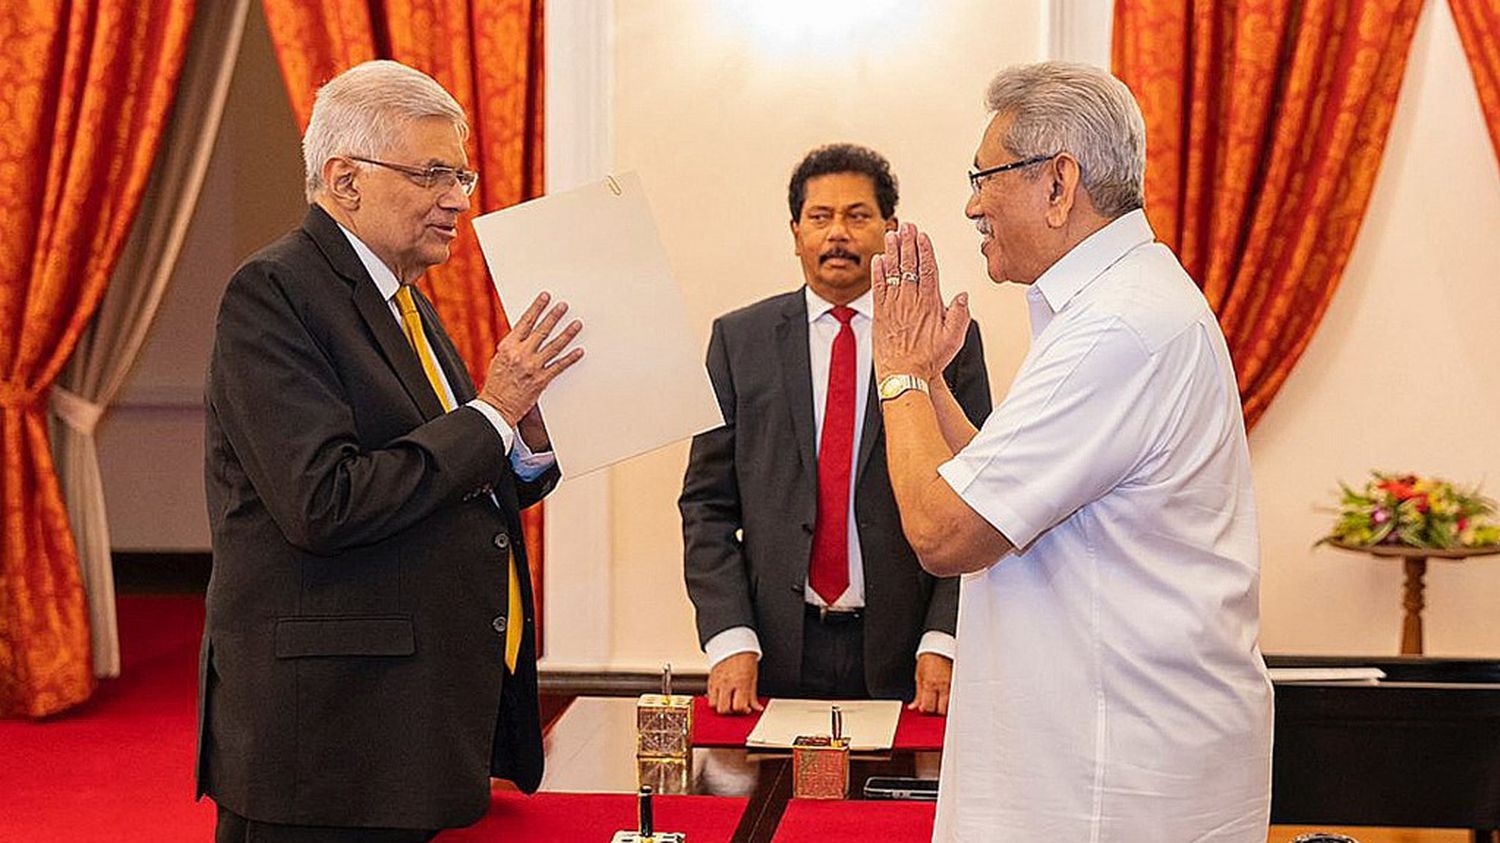 Sri Lanka: a new Prime Minister appointed in the midst of an economic crisis
